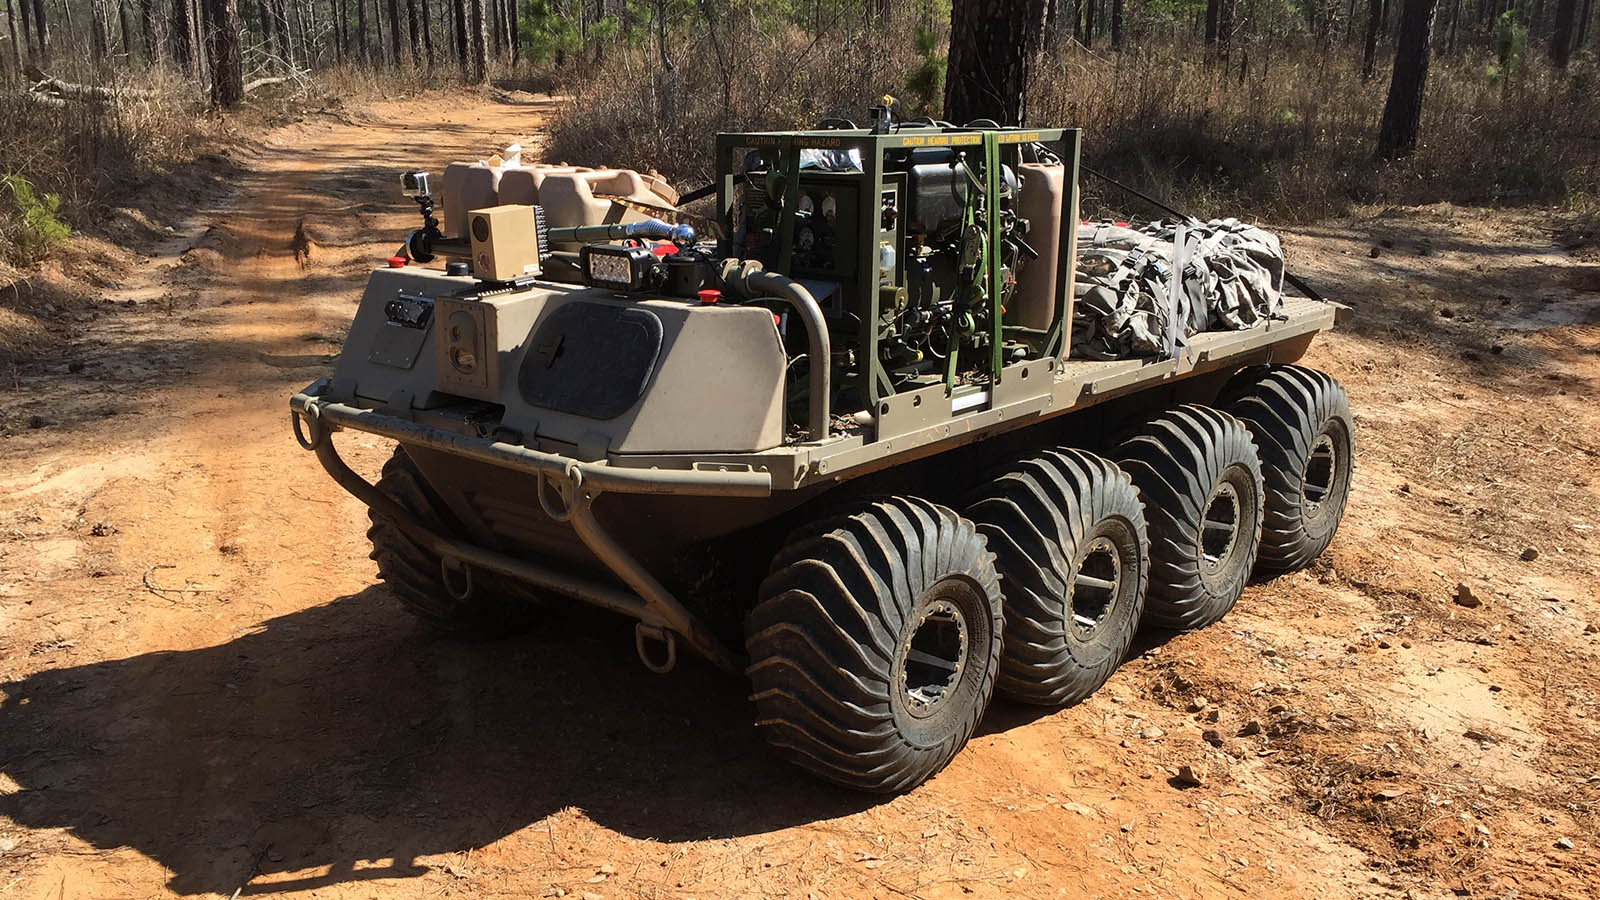 High-capacity General Dynamics MUTT Lithium Battery for advanced military unmanned ground vehicles.